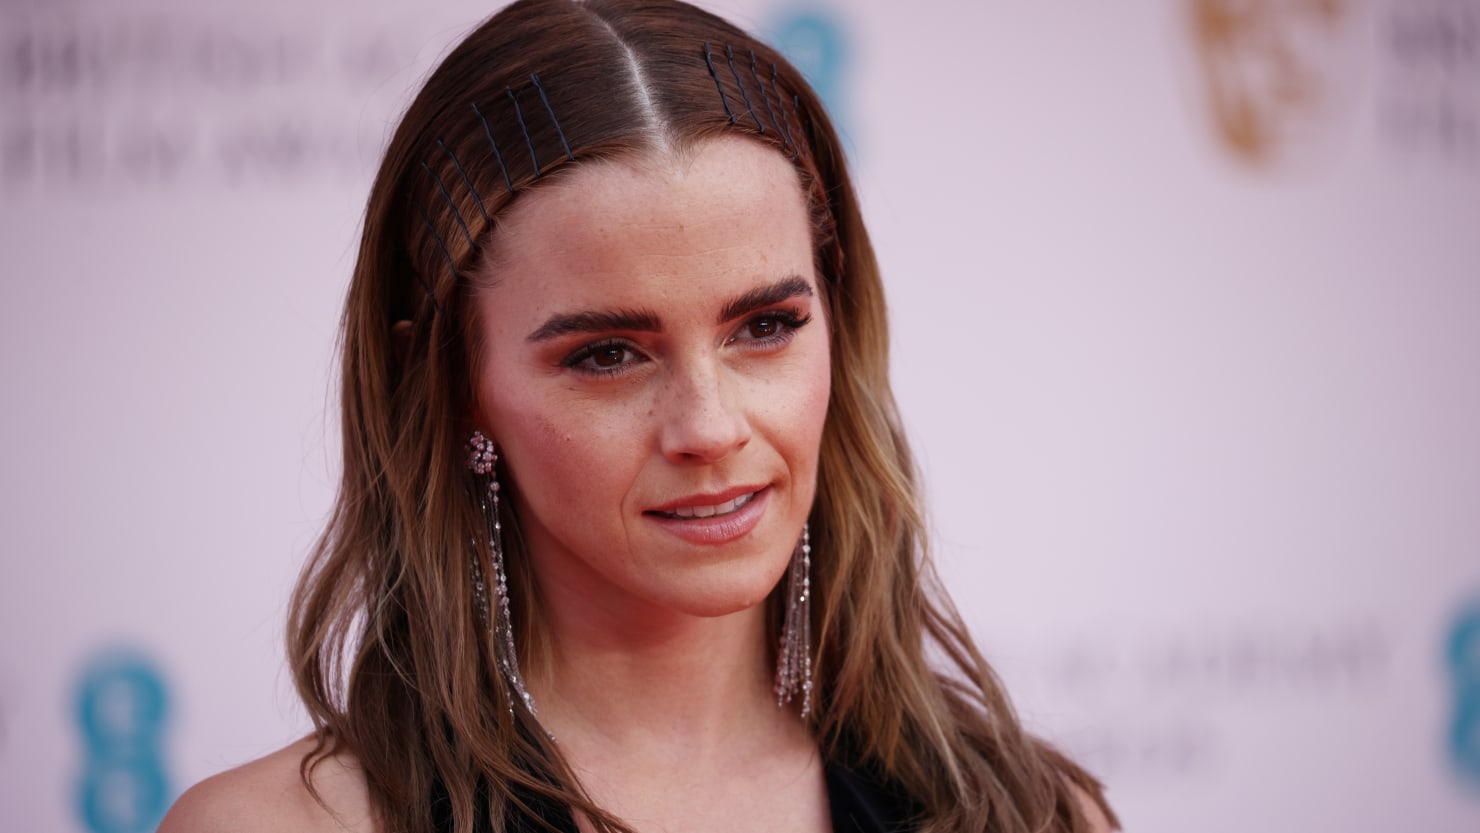 Twisted Deepfake Ads on Facebook, Instagram Use Emma Watson's Face: Report